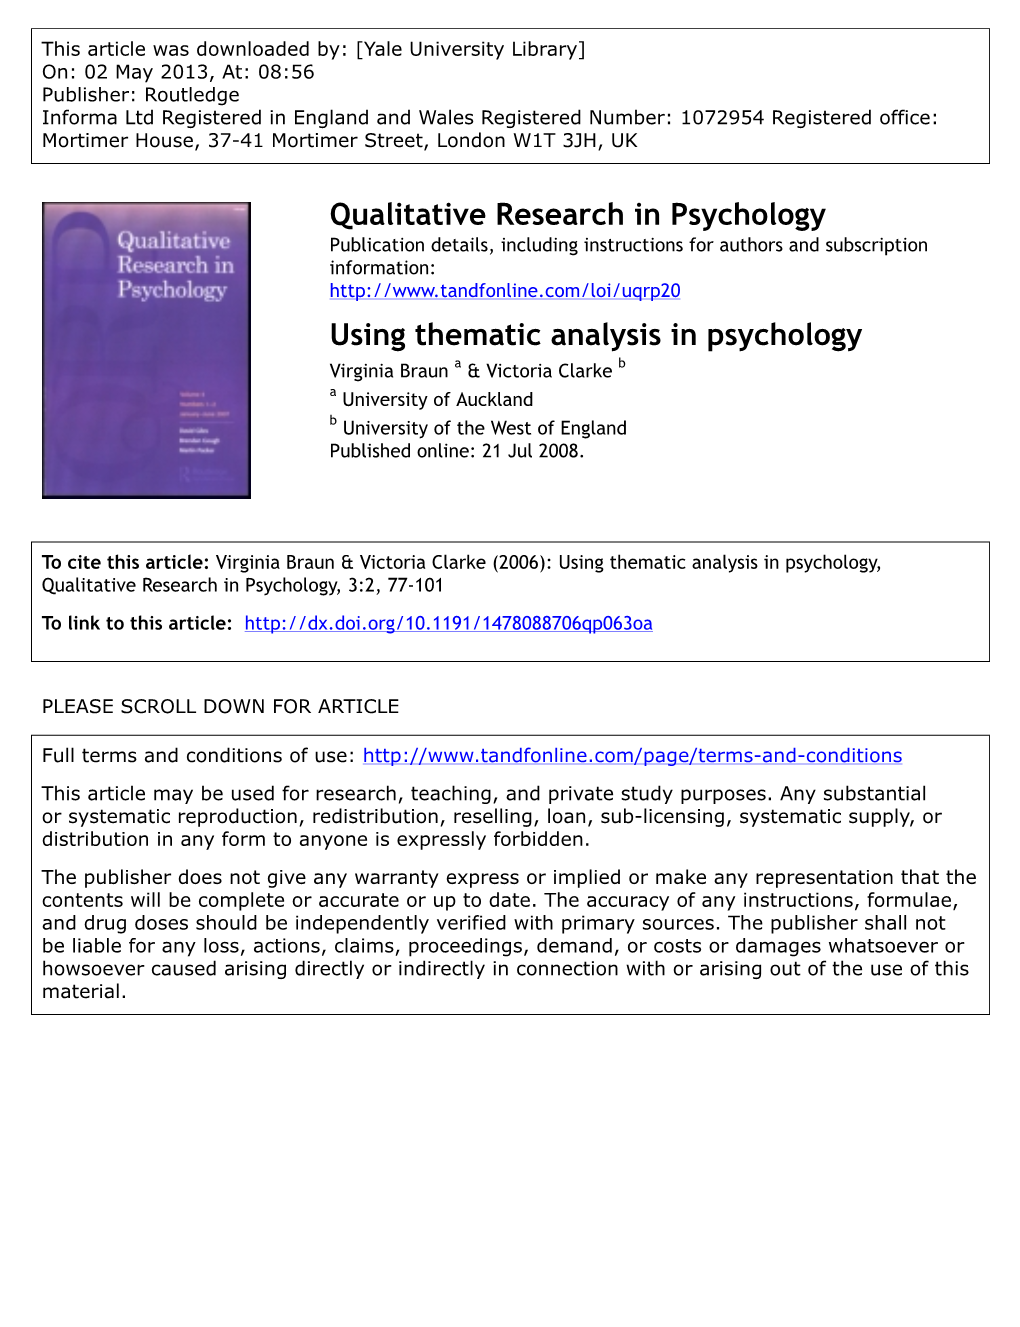 Using Thematic Analysis in Psychology. Qualitative Research in Psychology, 3